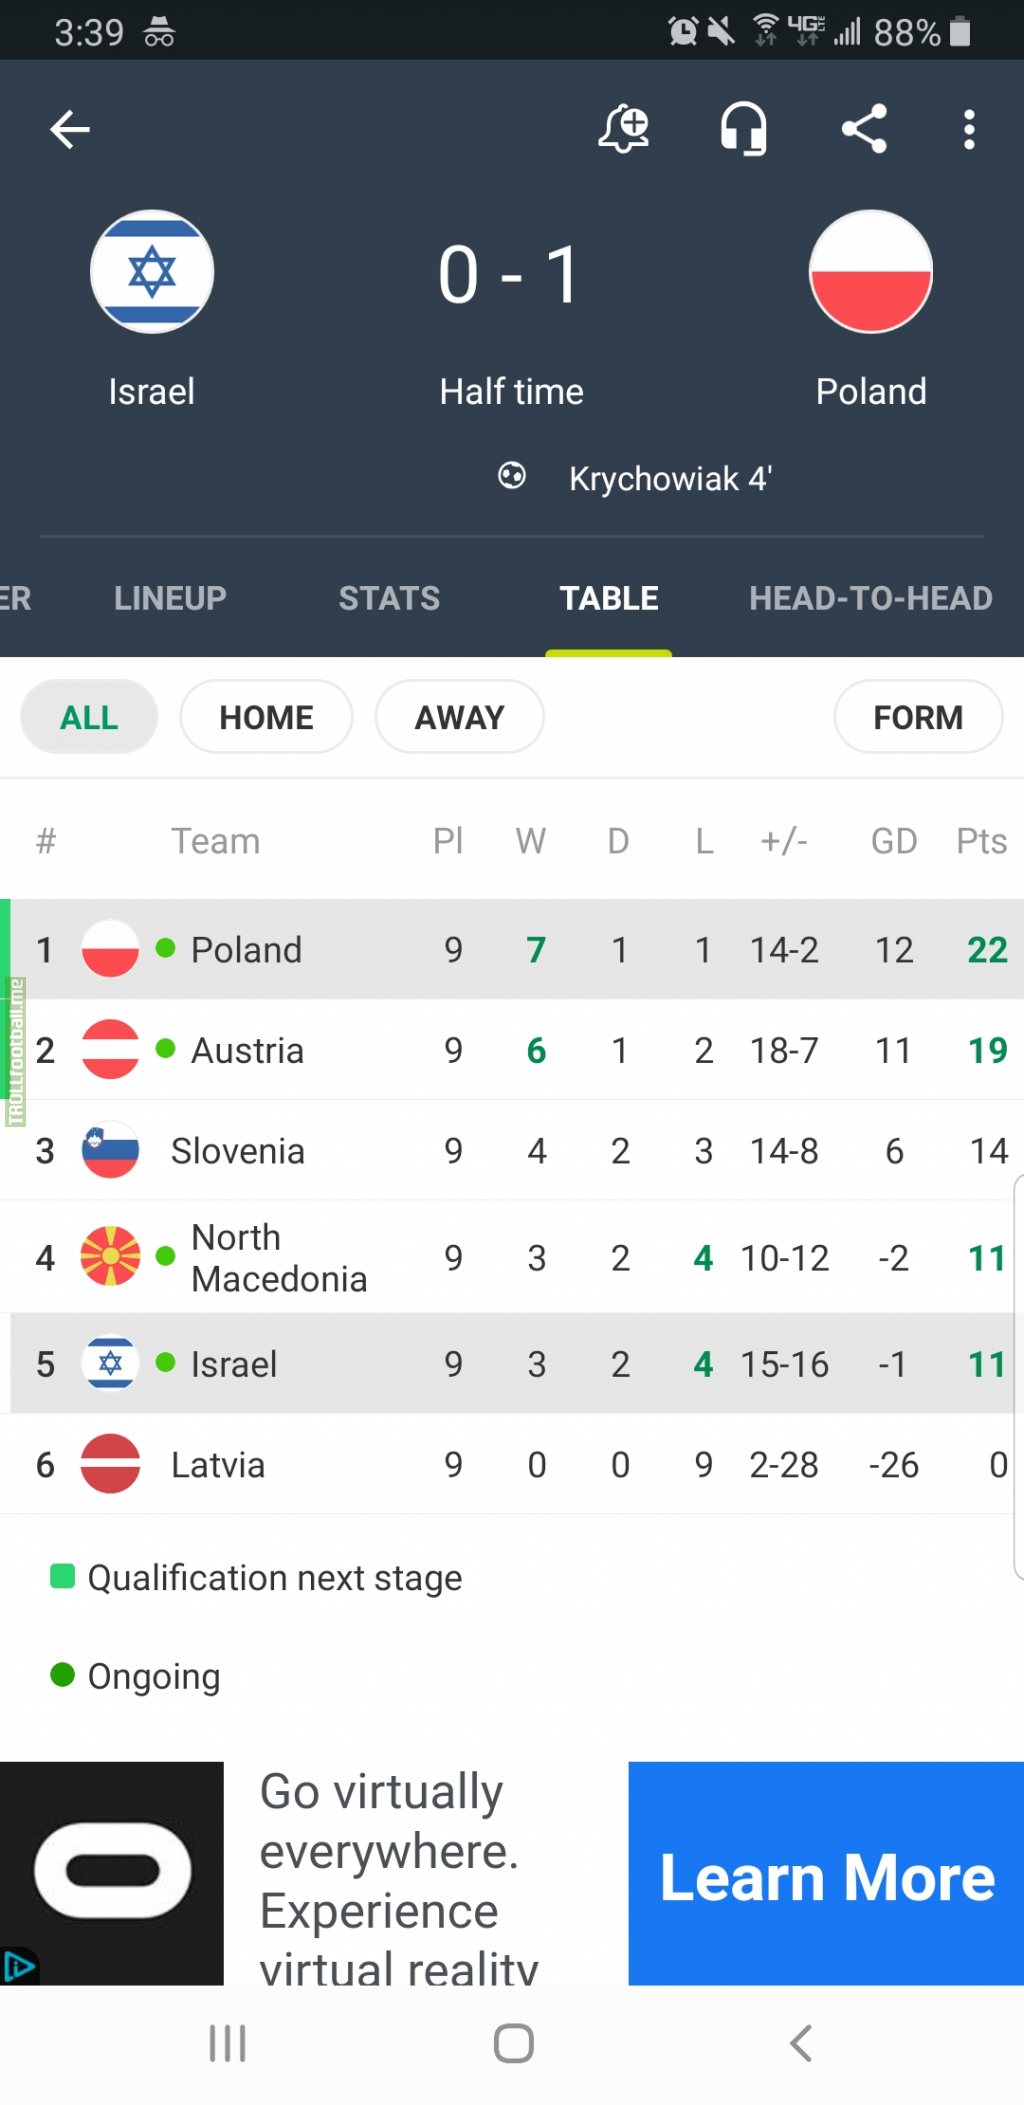 Israel finished highest in the Nations League out of the three other teams below automatic qualification. Does that mean that no matter how they do in the next two games, if Poland and Austria stay in the automatic qualification spot, Israel gets a playoff spot?